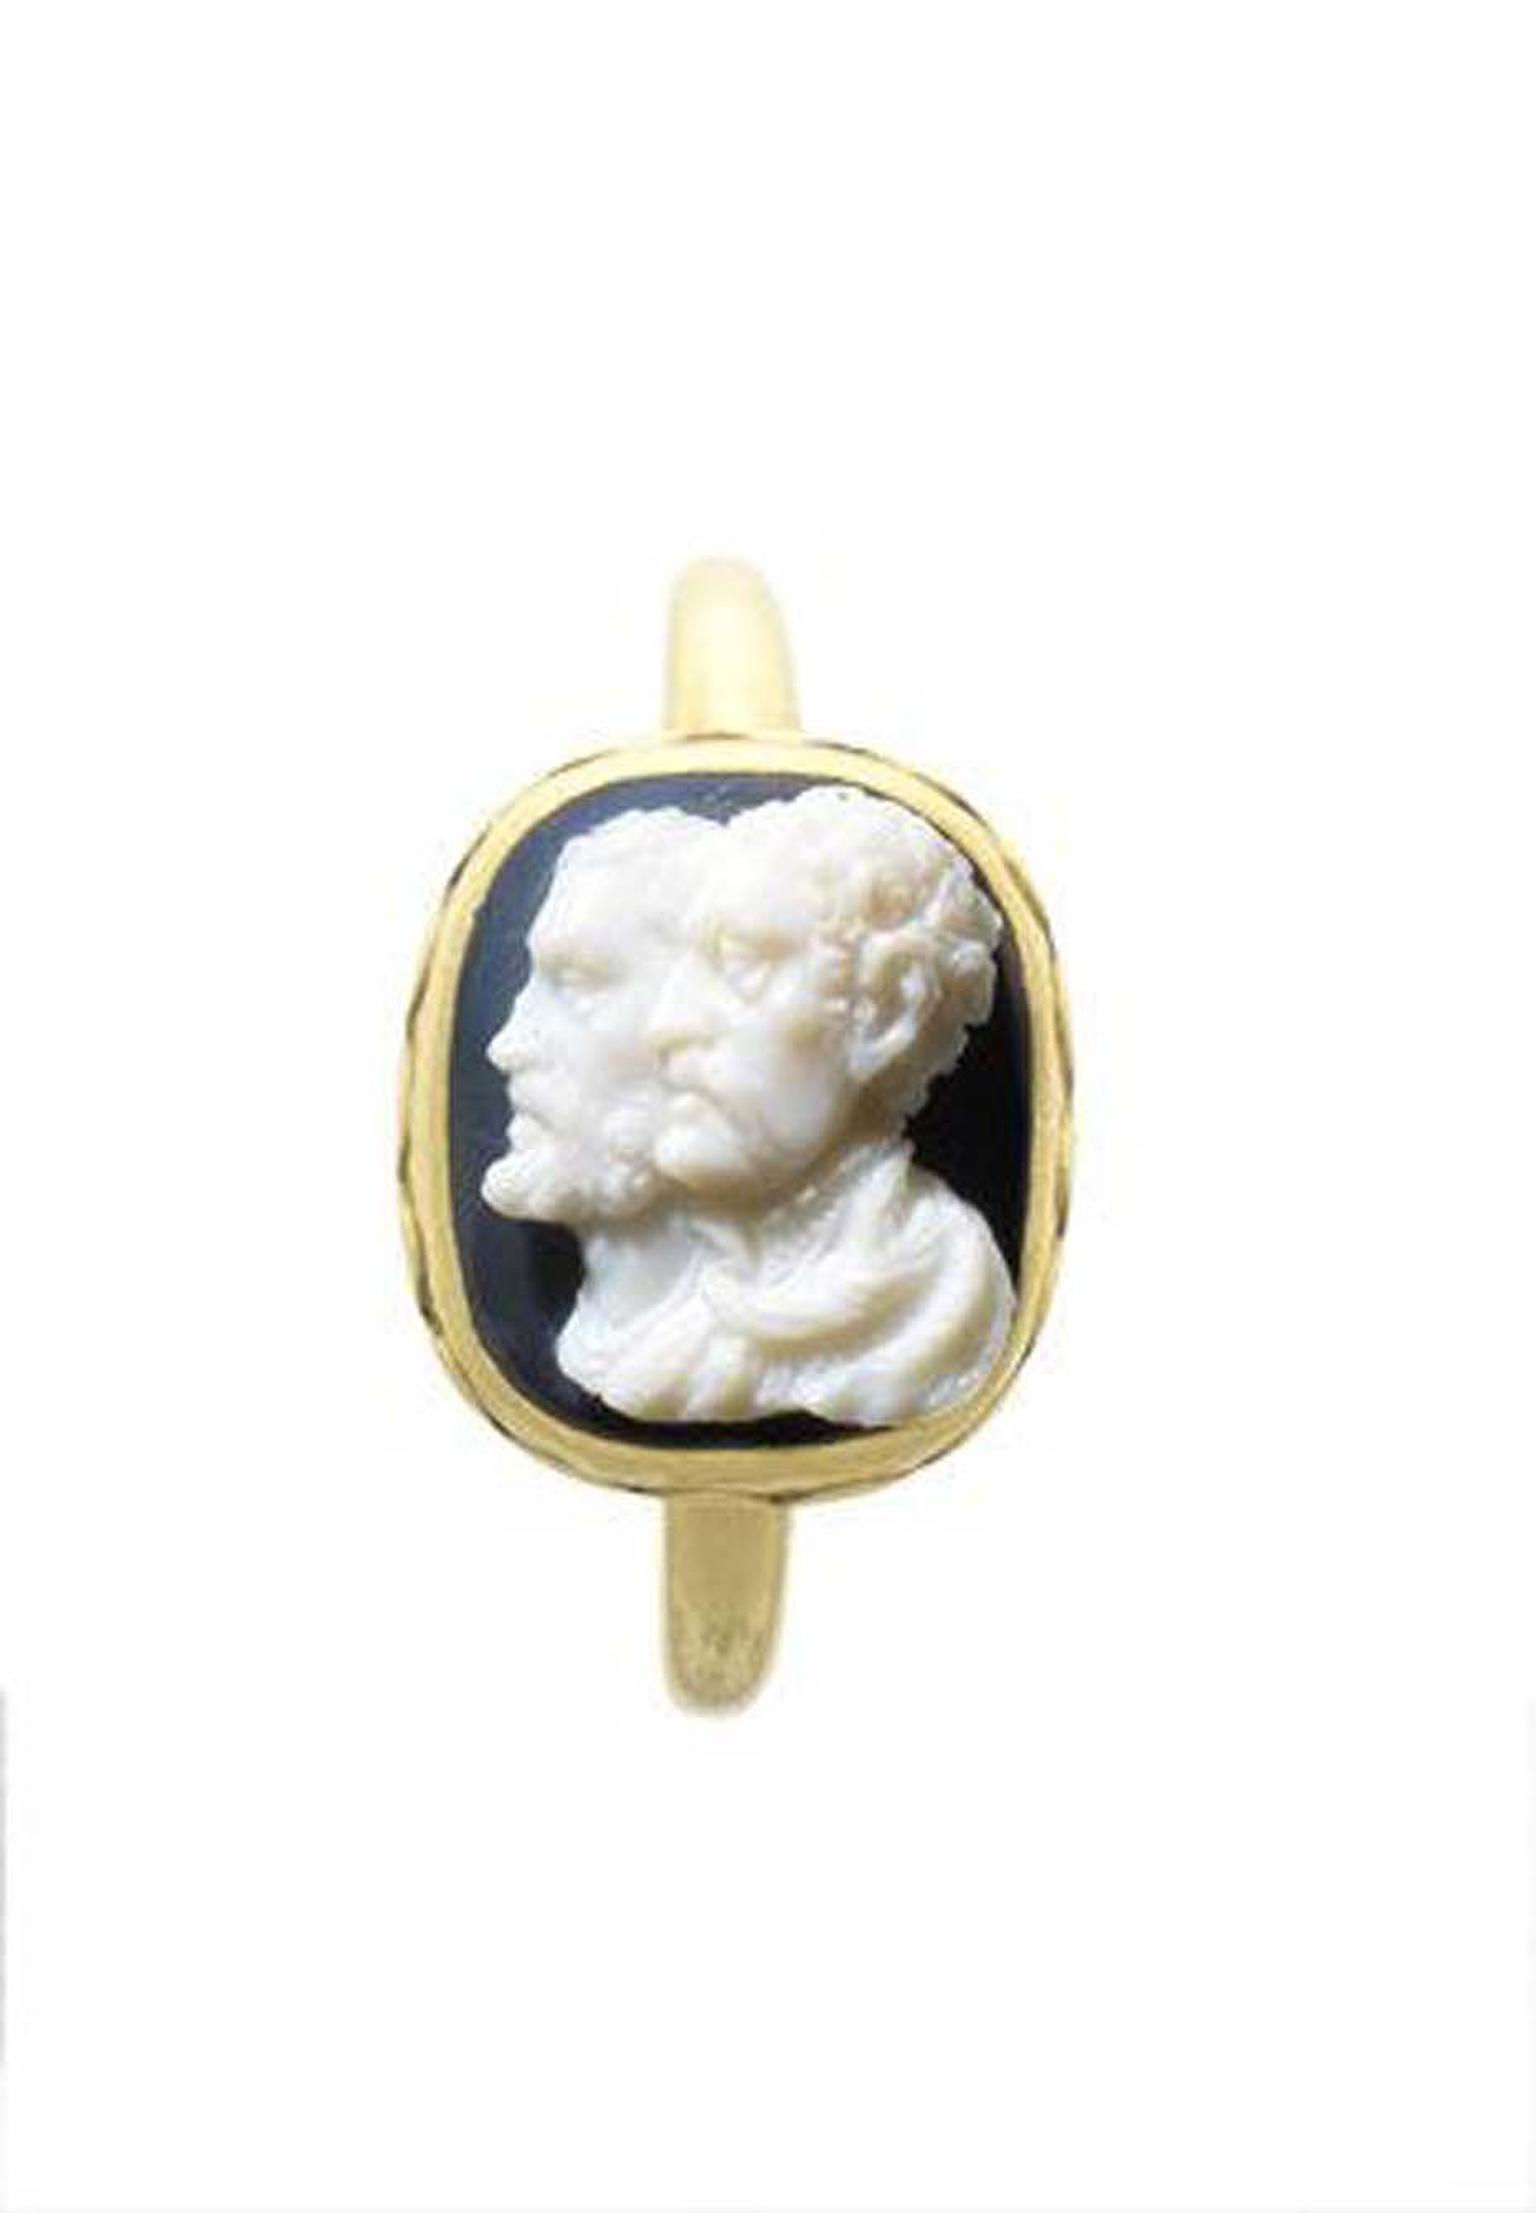 A 16th-17th century double portrait agate cameo ring to be auctioned by Bonhams London.